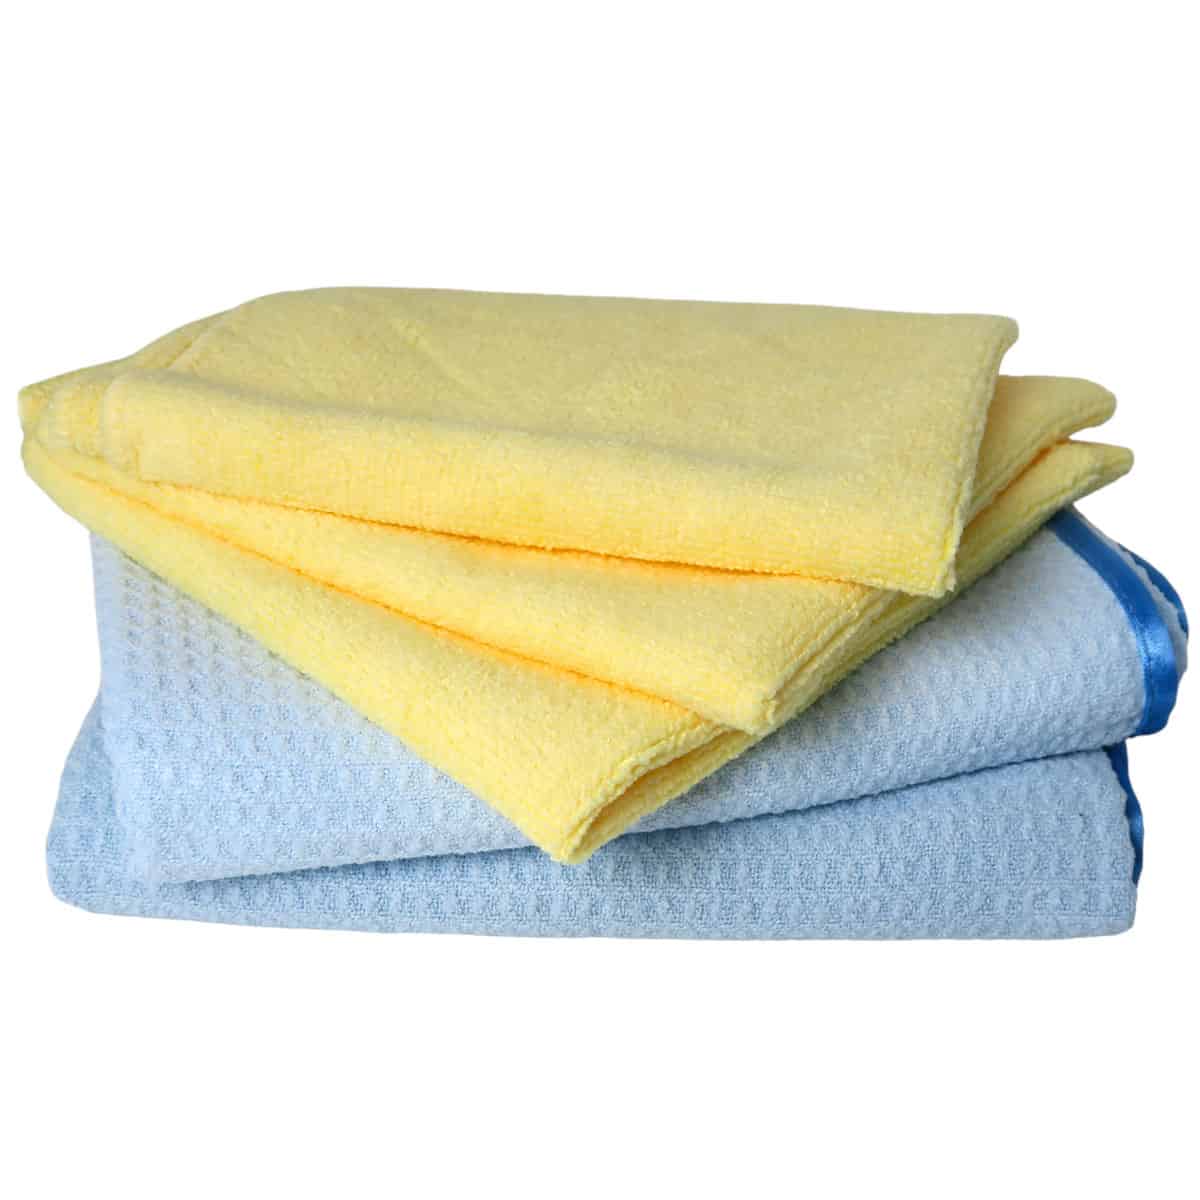 Chemical Guys Microfibre Towel Combo: Buy 2x Super Absorber Waffle Drying Towels & Get 3x Super Soft Cleaning Towels FREE